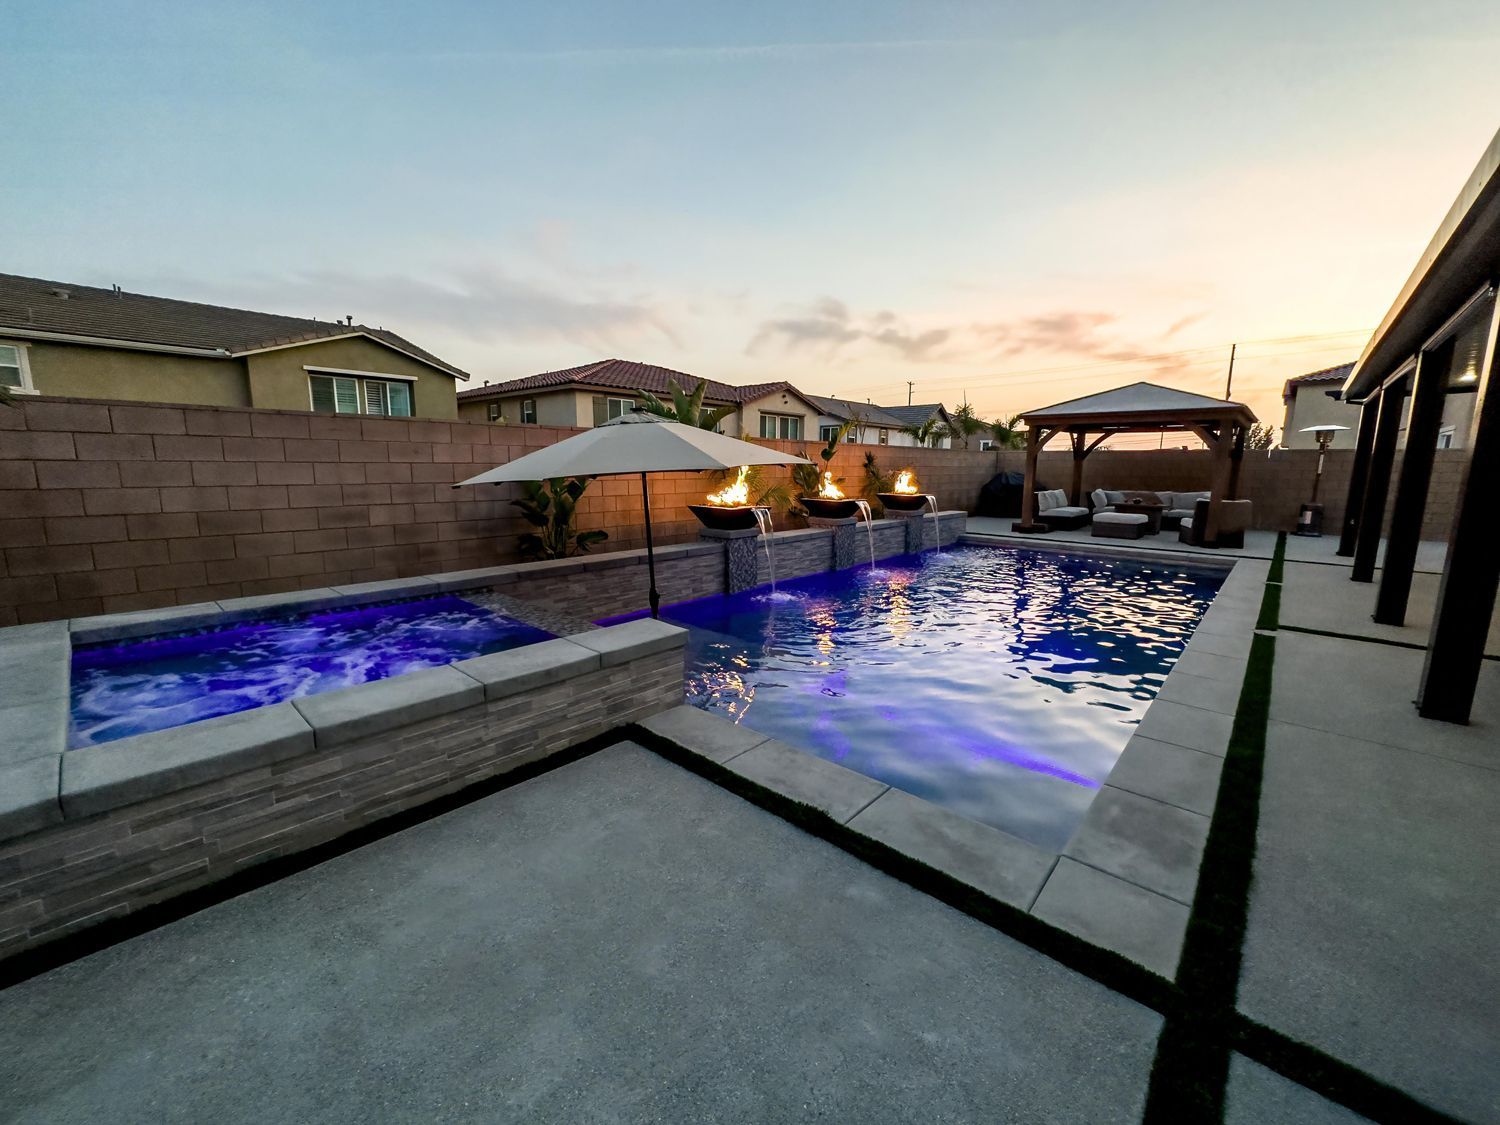 New pool construction and remodeling in Upland, CA.